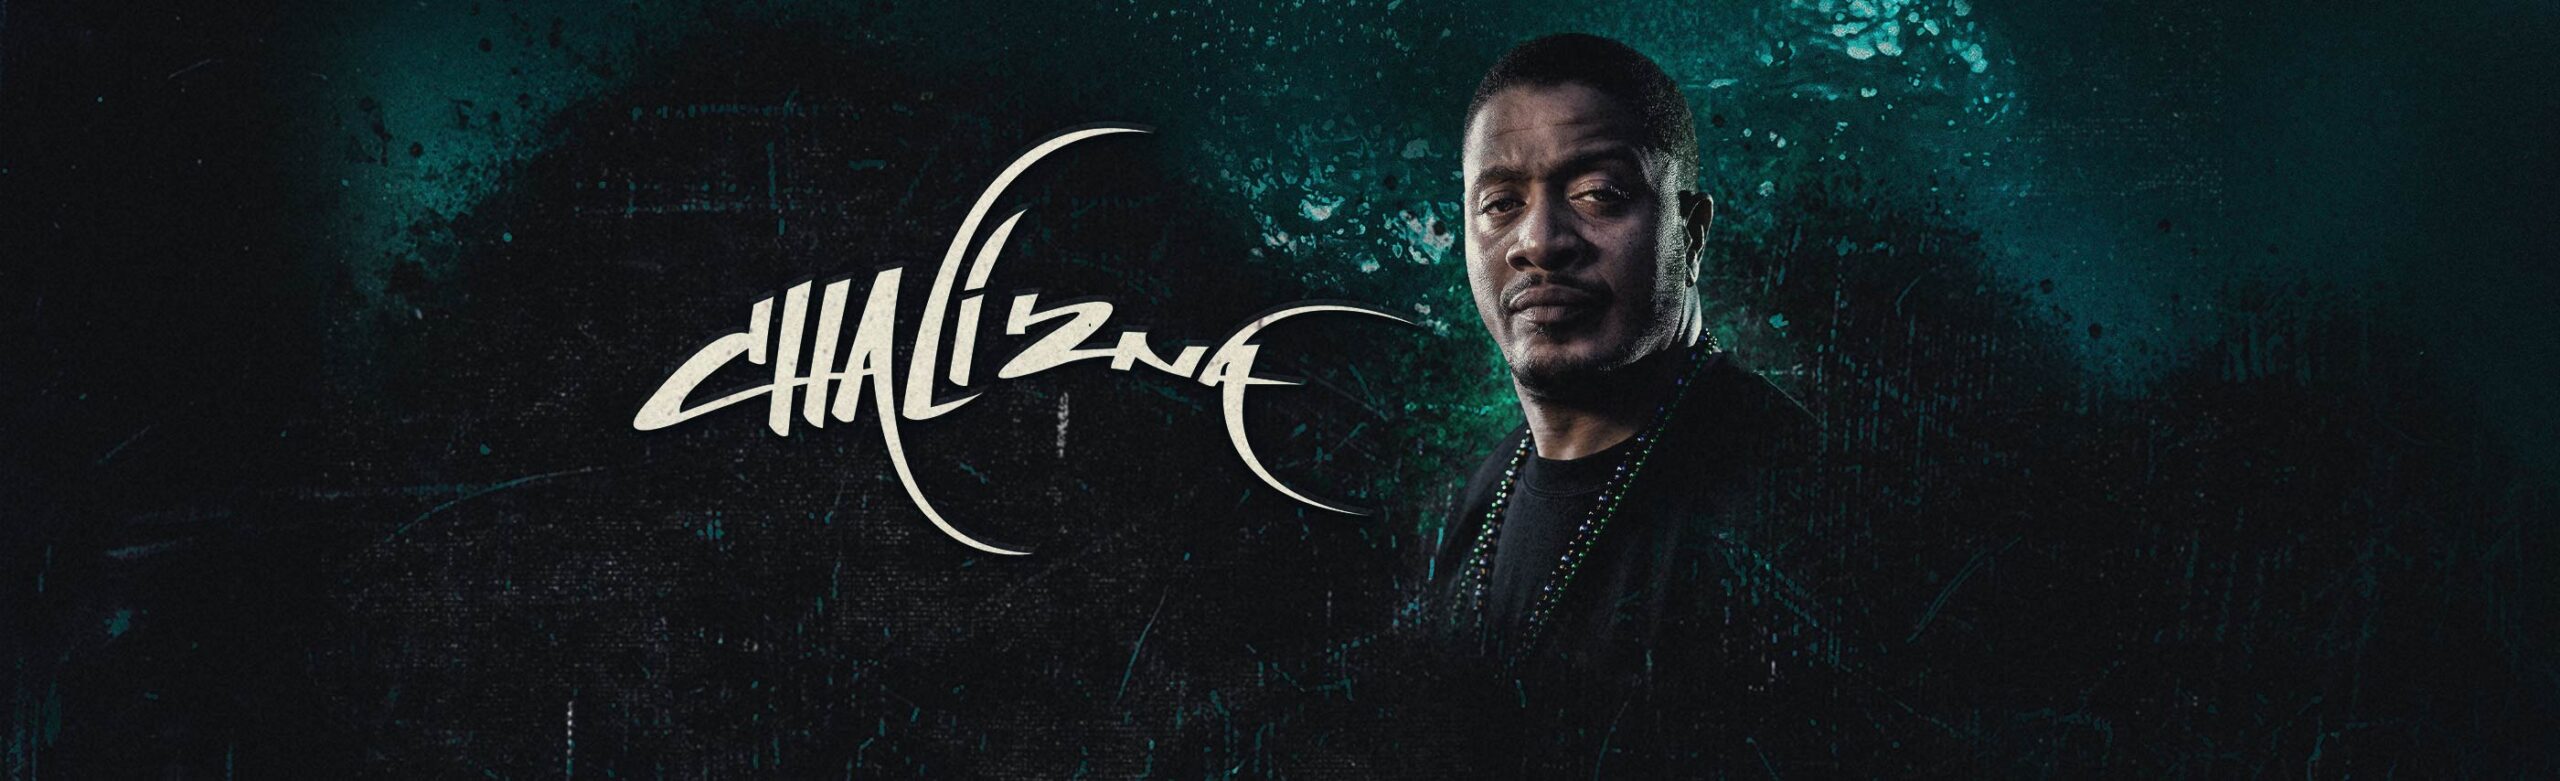 Chali 2na Announces Concert at the Rialto in 2024 Image